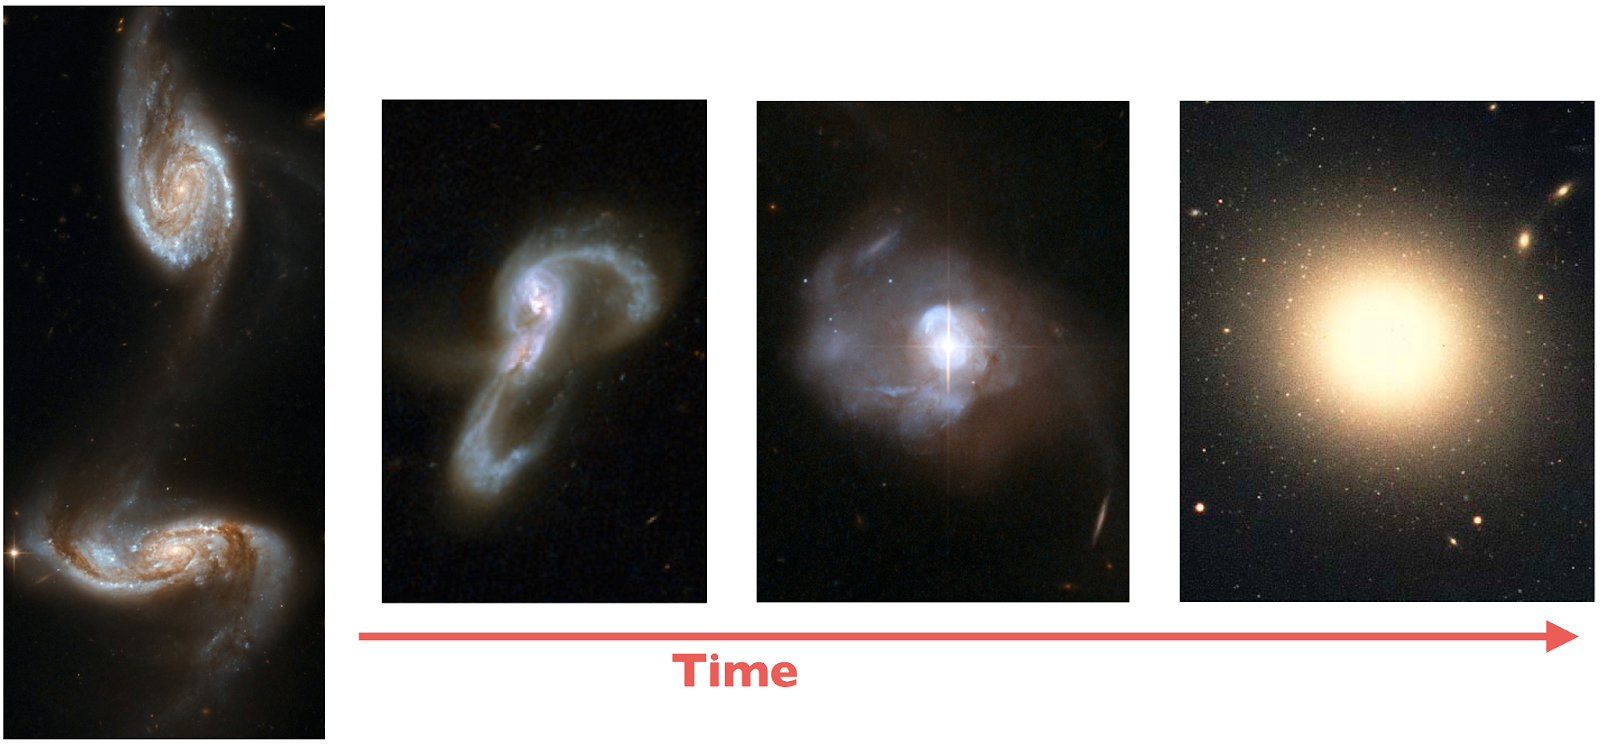 HST images of three luminous infrared galaxies and an elliptical galaxy (i.e., the byproduct of a gas-rich galaxy merger). The galaxies are shown in the evolutionary time sequence of a gas-rich merger event where the AGN is optically visible in the latter stages. Galaxy mergers build up the stellar bulges and central supermassive black hole masses, and feedback from both processes help to shape the stellar mass functions of galaxies. Nearby normal galaxies have stellar bulge-to-supermassive black hole mass ratios of ~ 1000, which is indicative of a regulatory process occurring in the central regions of galaxies during active phases of growth.